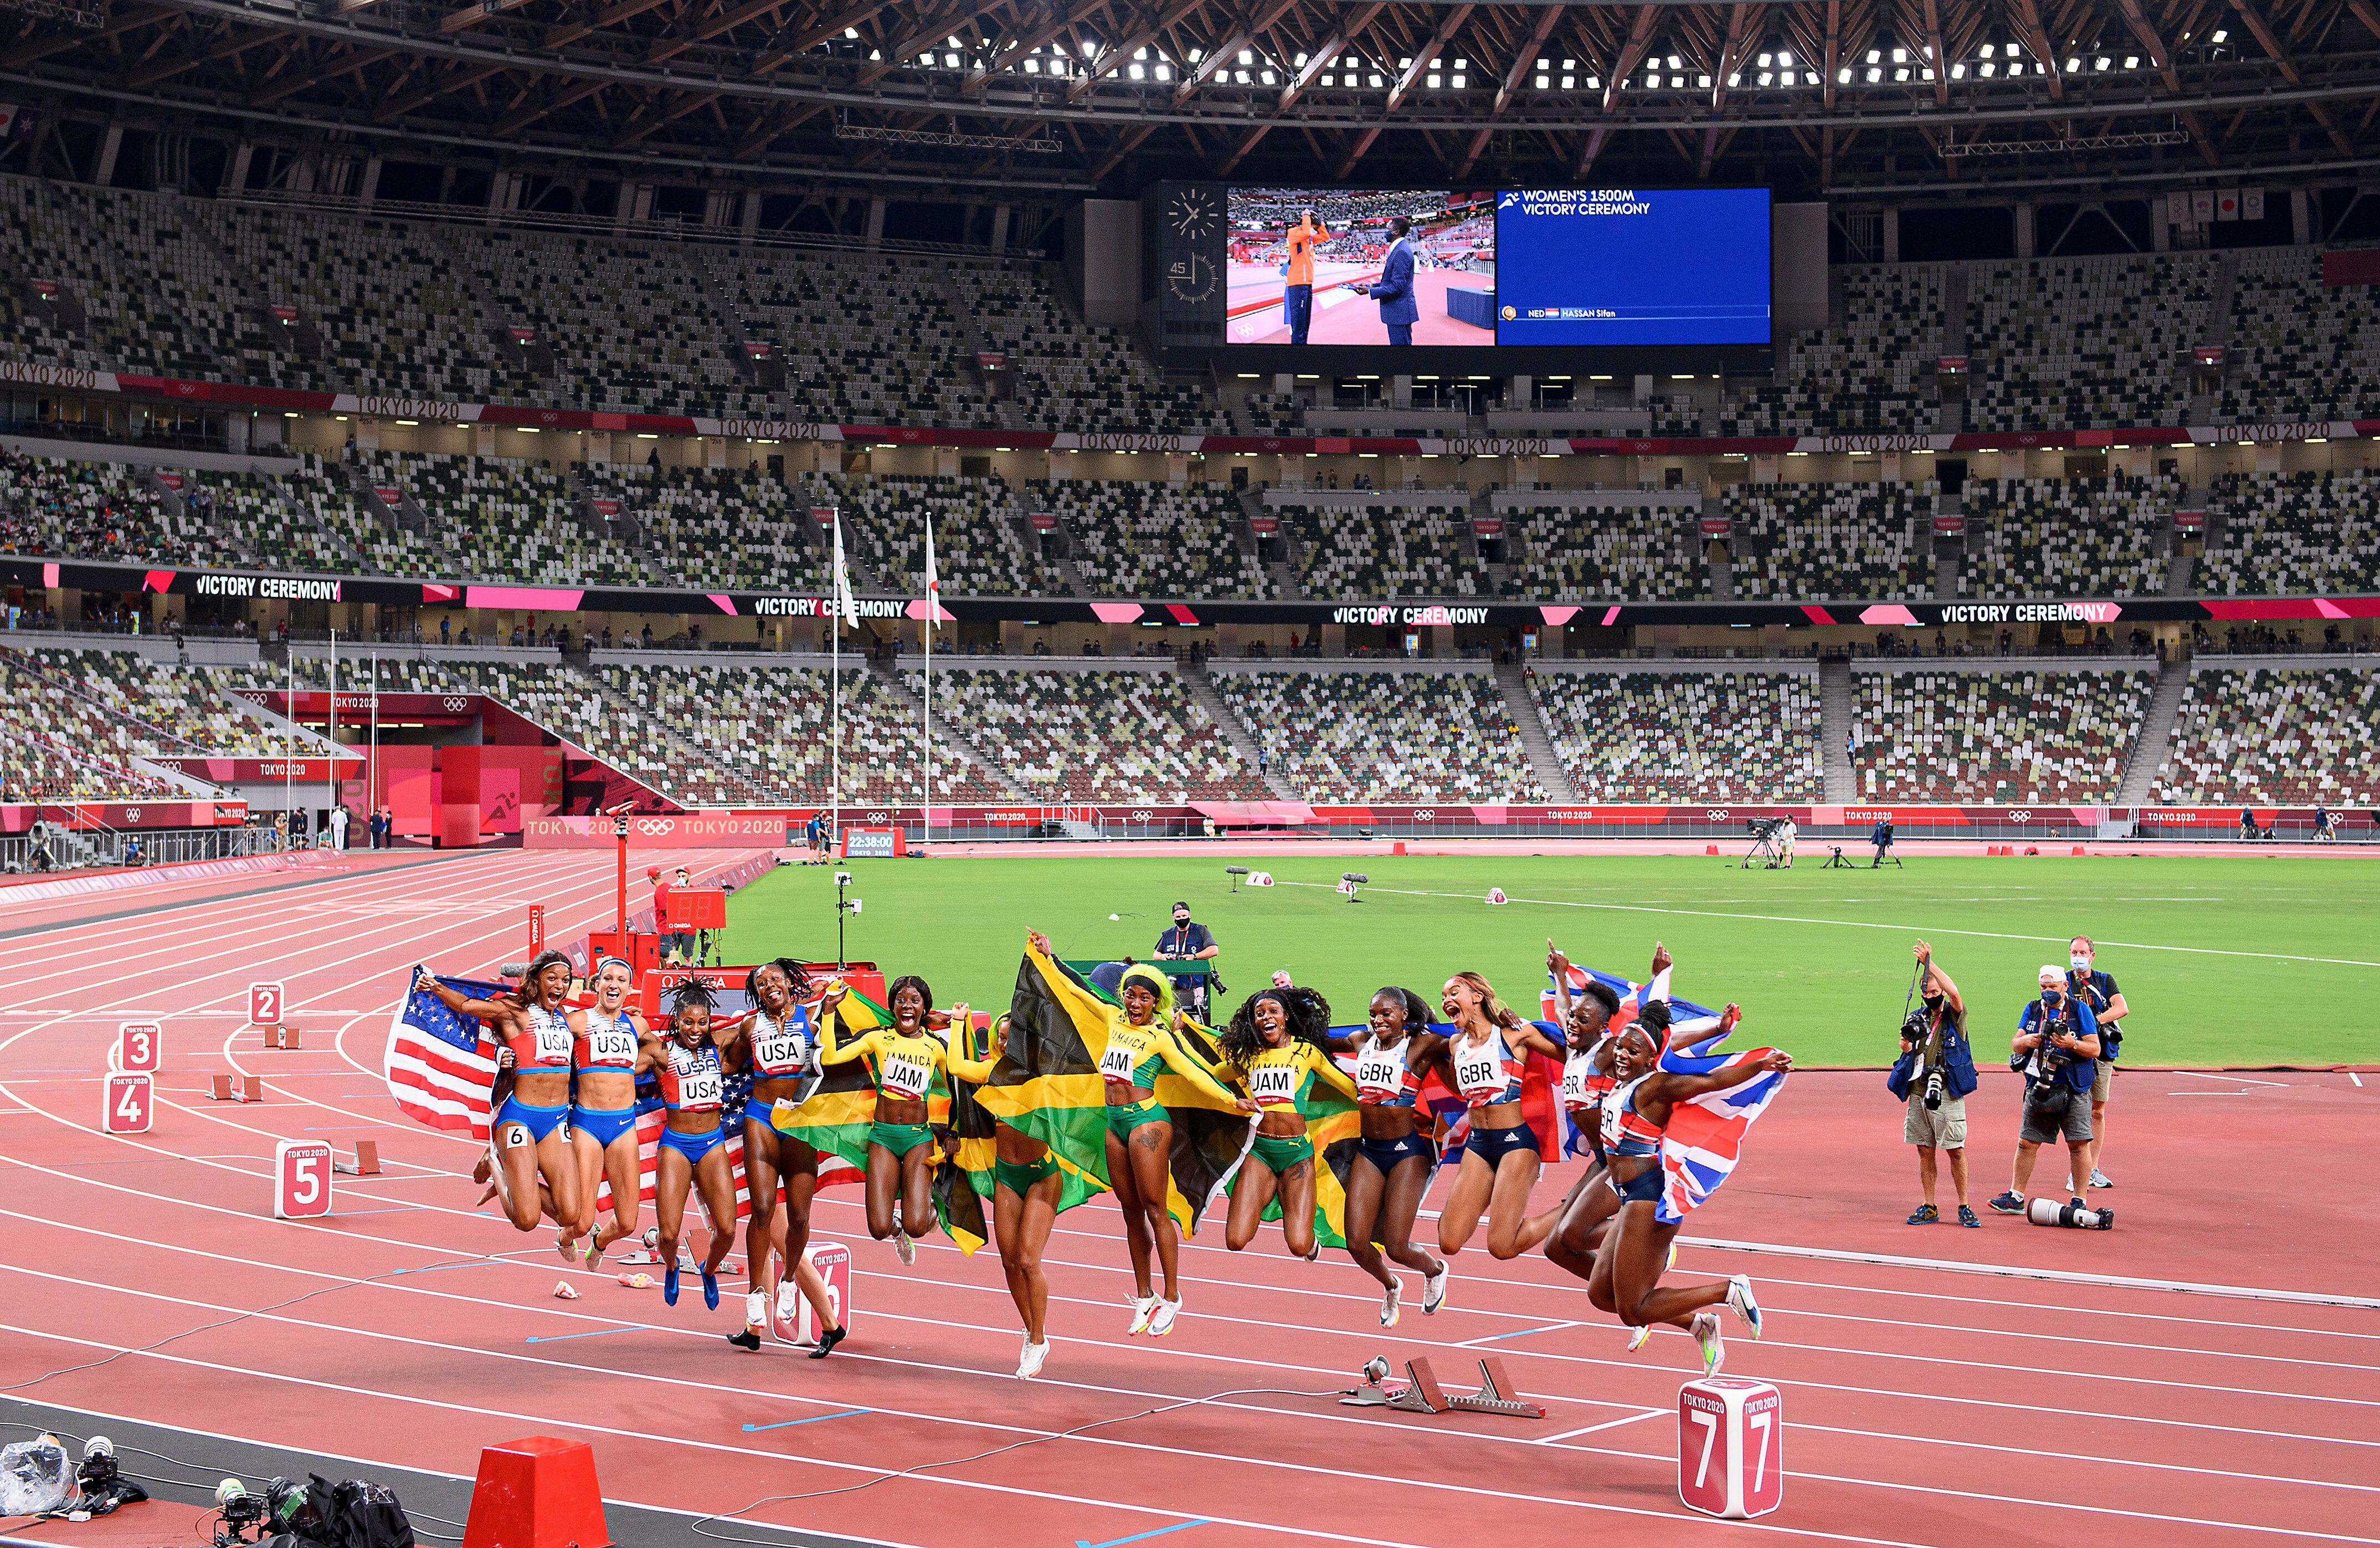 Our guide to the World Athletics Championships 2022 What to Watch